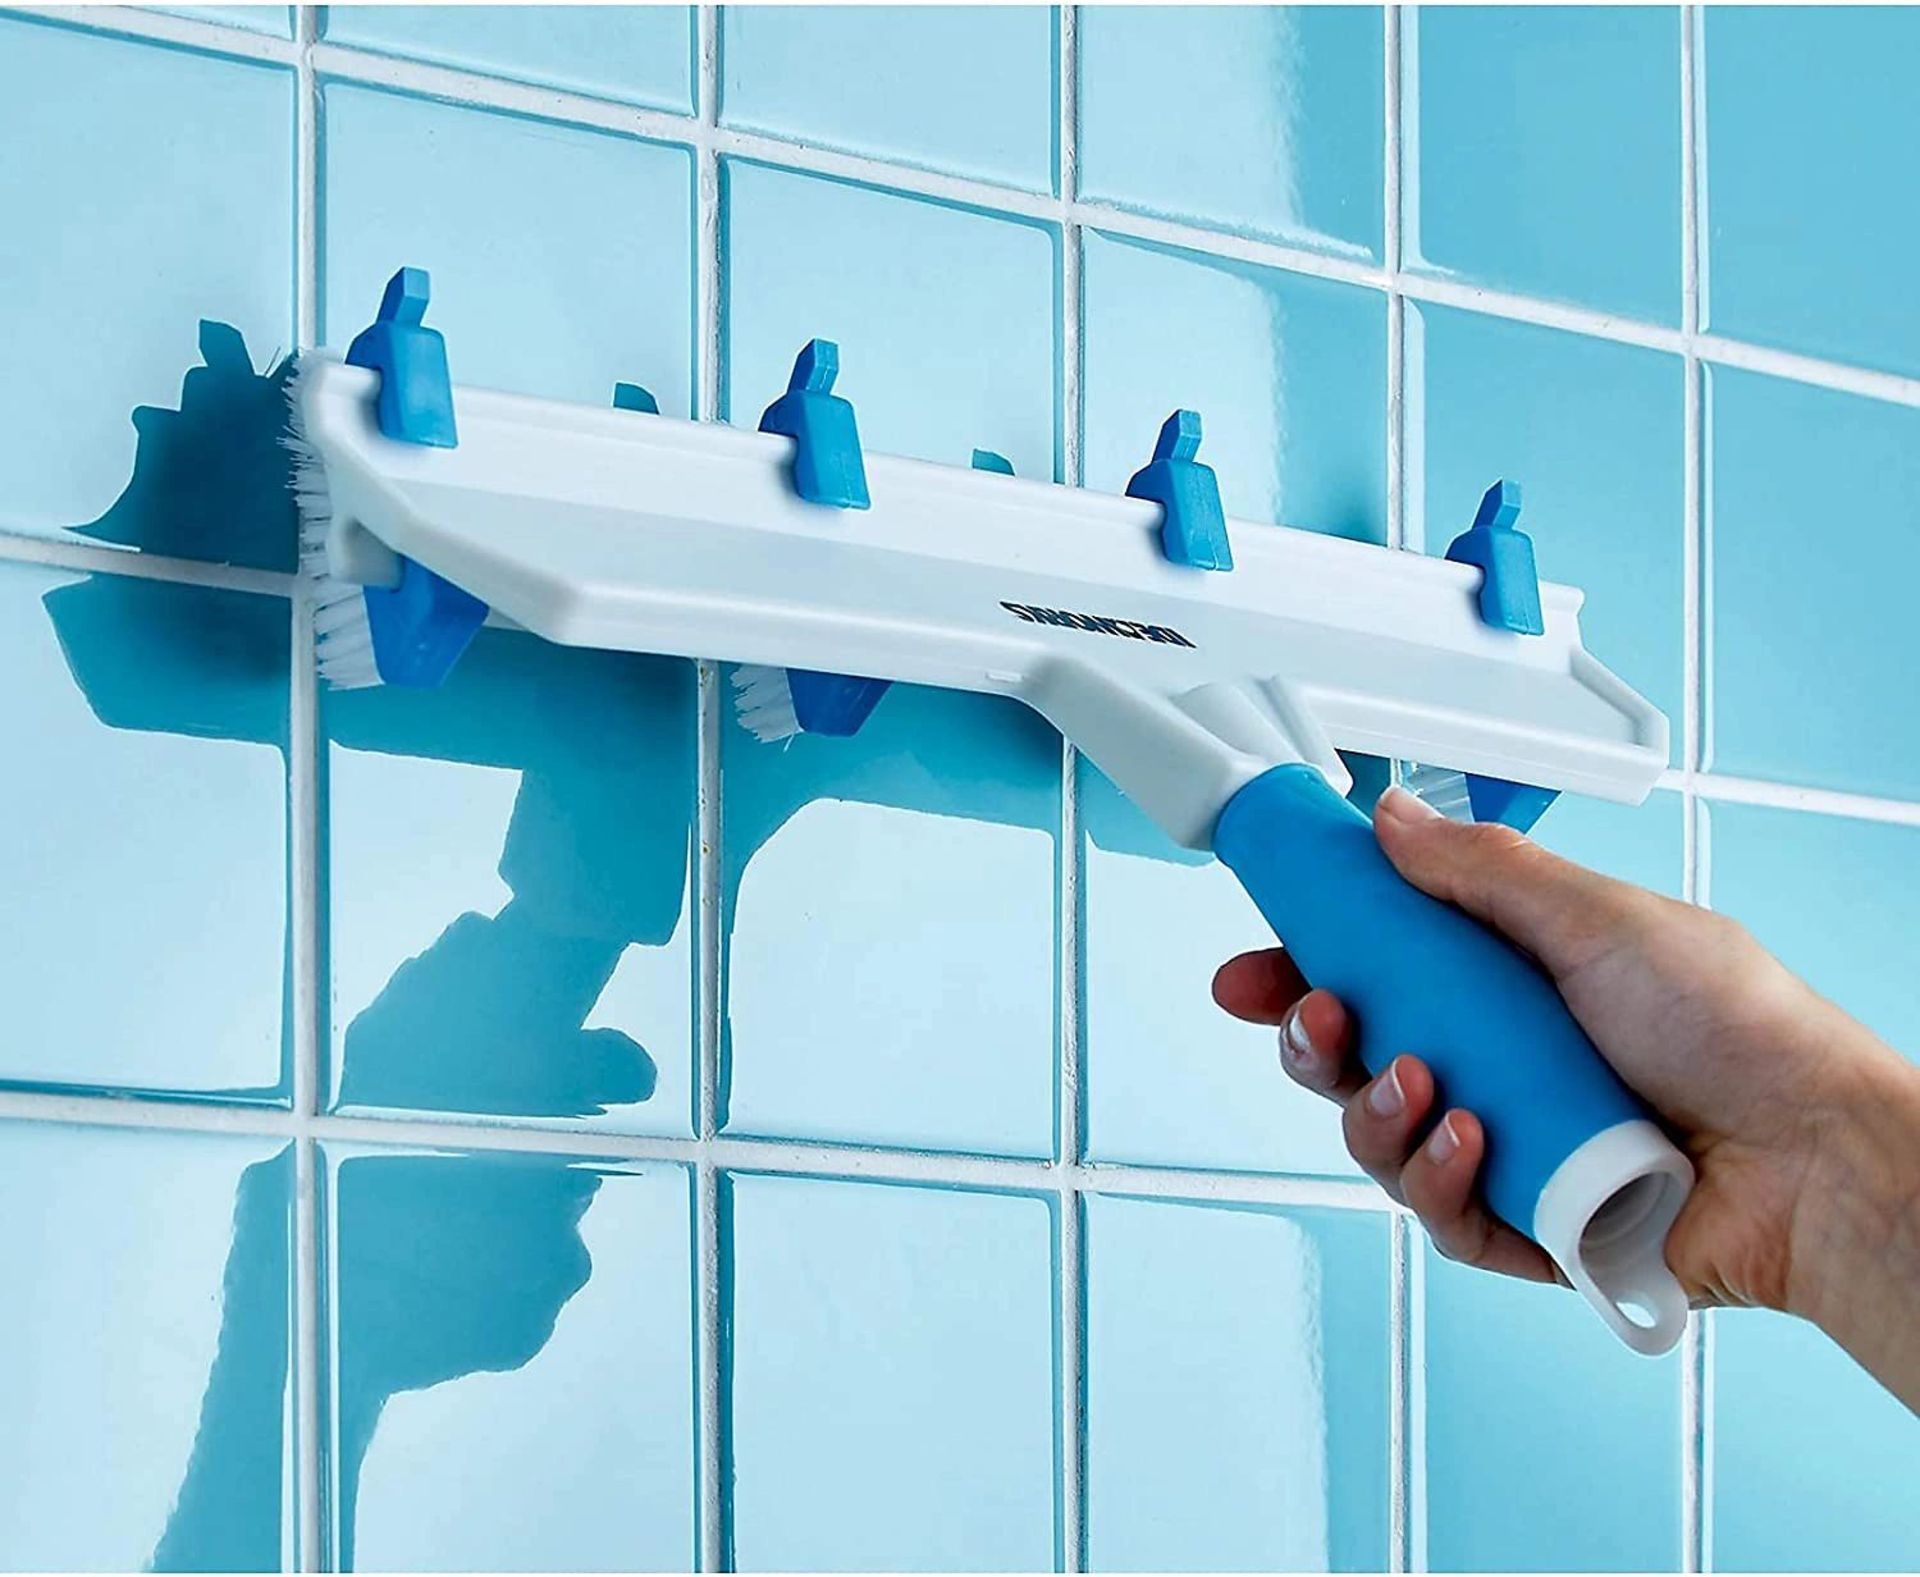 20 X BRAND NEW ADJUSTABLE HANDHELD GROUT CLEANING TOOLWITH SOFT GRIP HANDLE AND 8 MINI BRUSH HEADS - Image 2 of 3